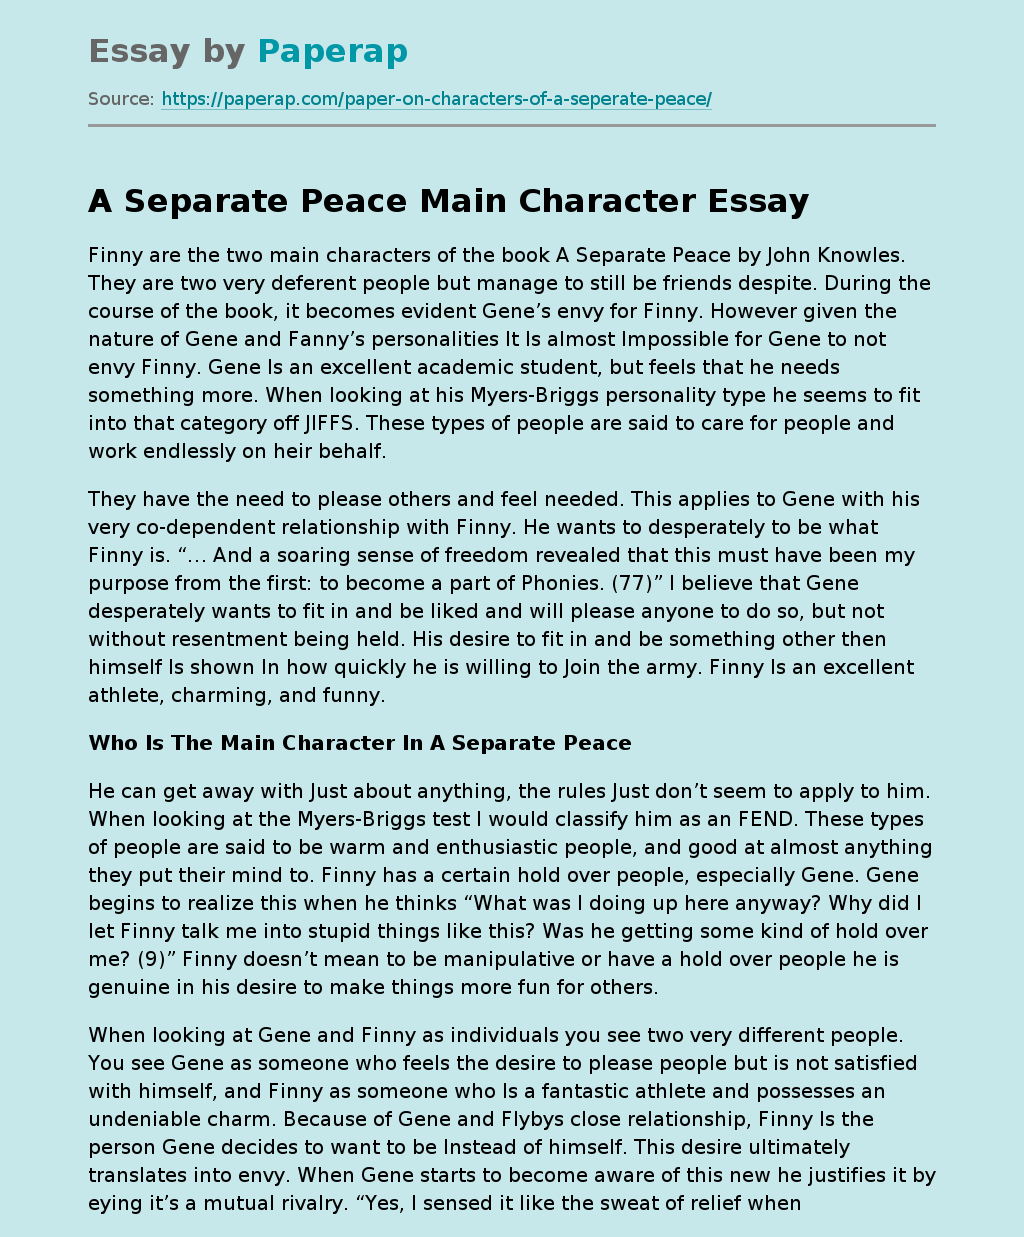 A Separate Peace Main Character